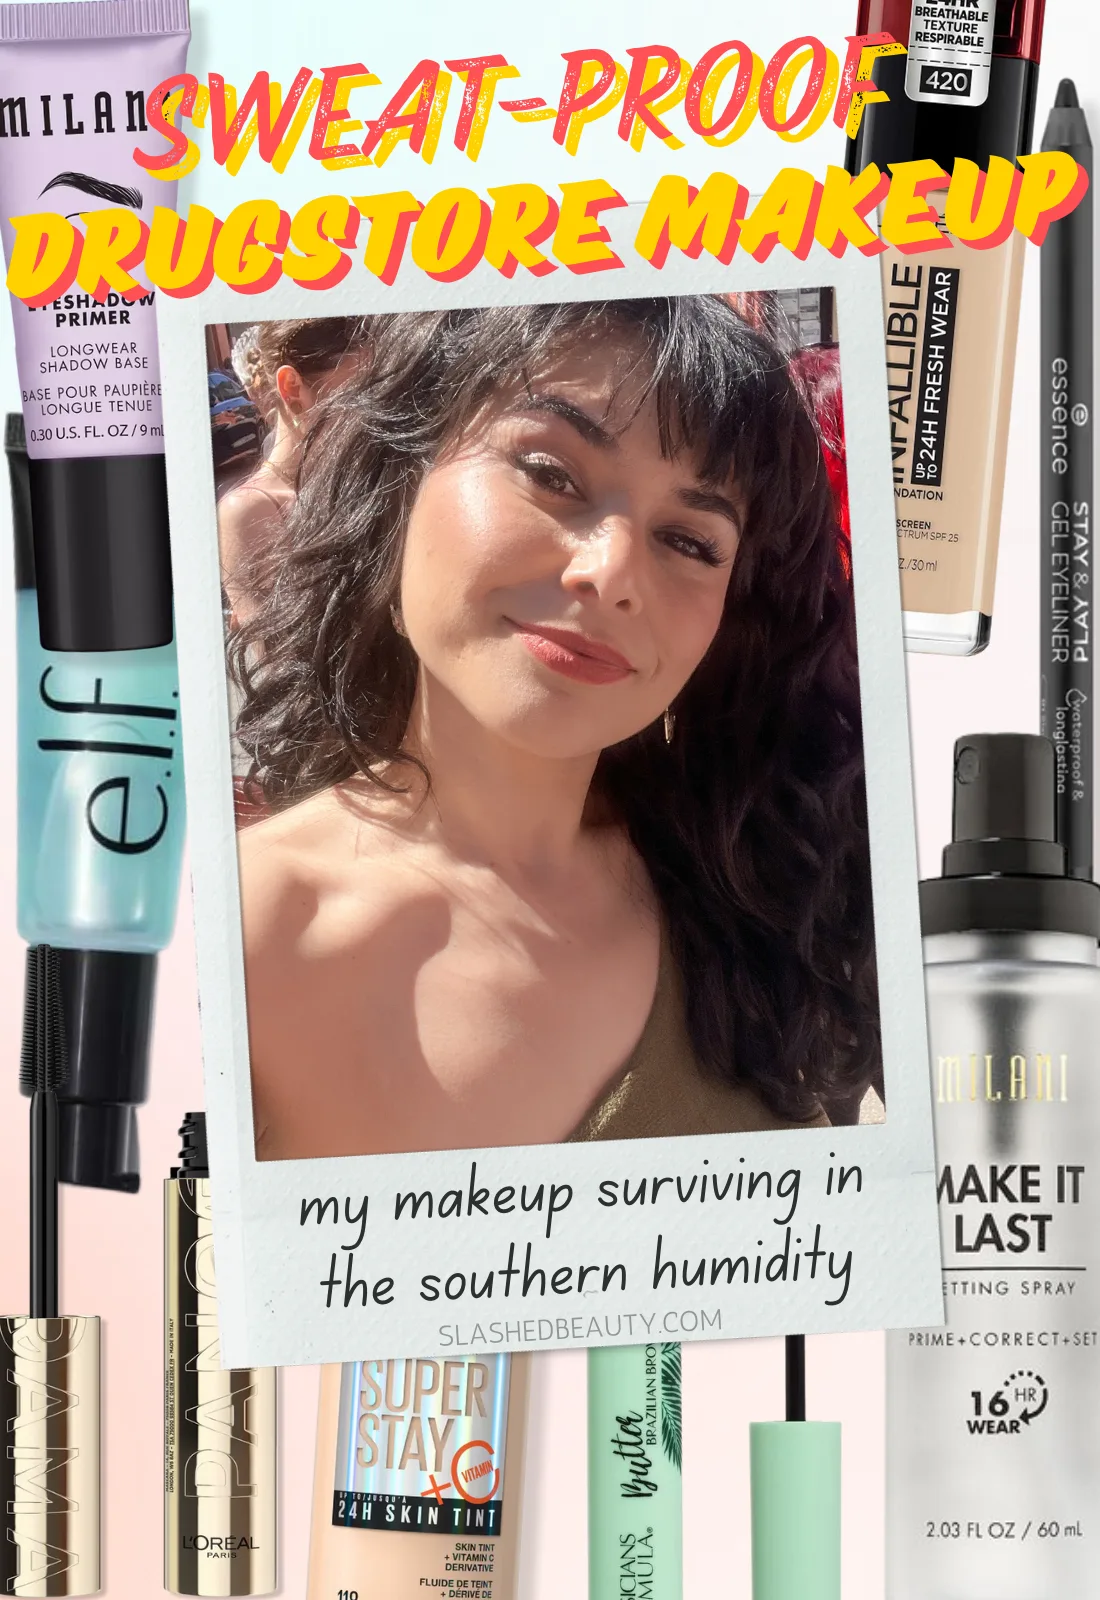 Product collage and polaroid of Miranda smiling to camera with sun ،ning on her face with text written: "my makeup surviving in the southern humidity." | Sweat-Proof Drugstore Makeup | Slashed Beauty